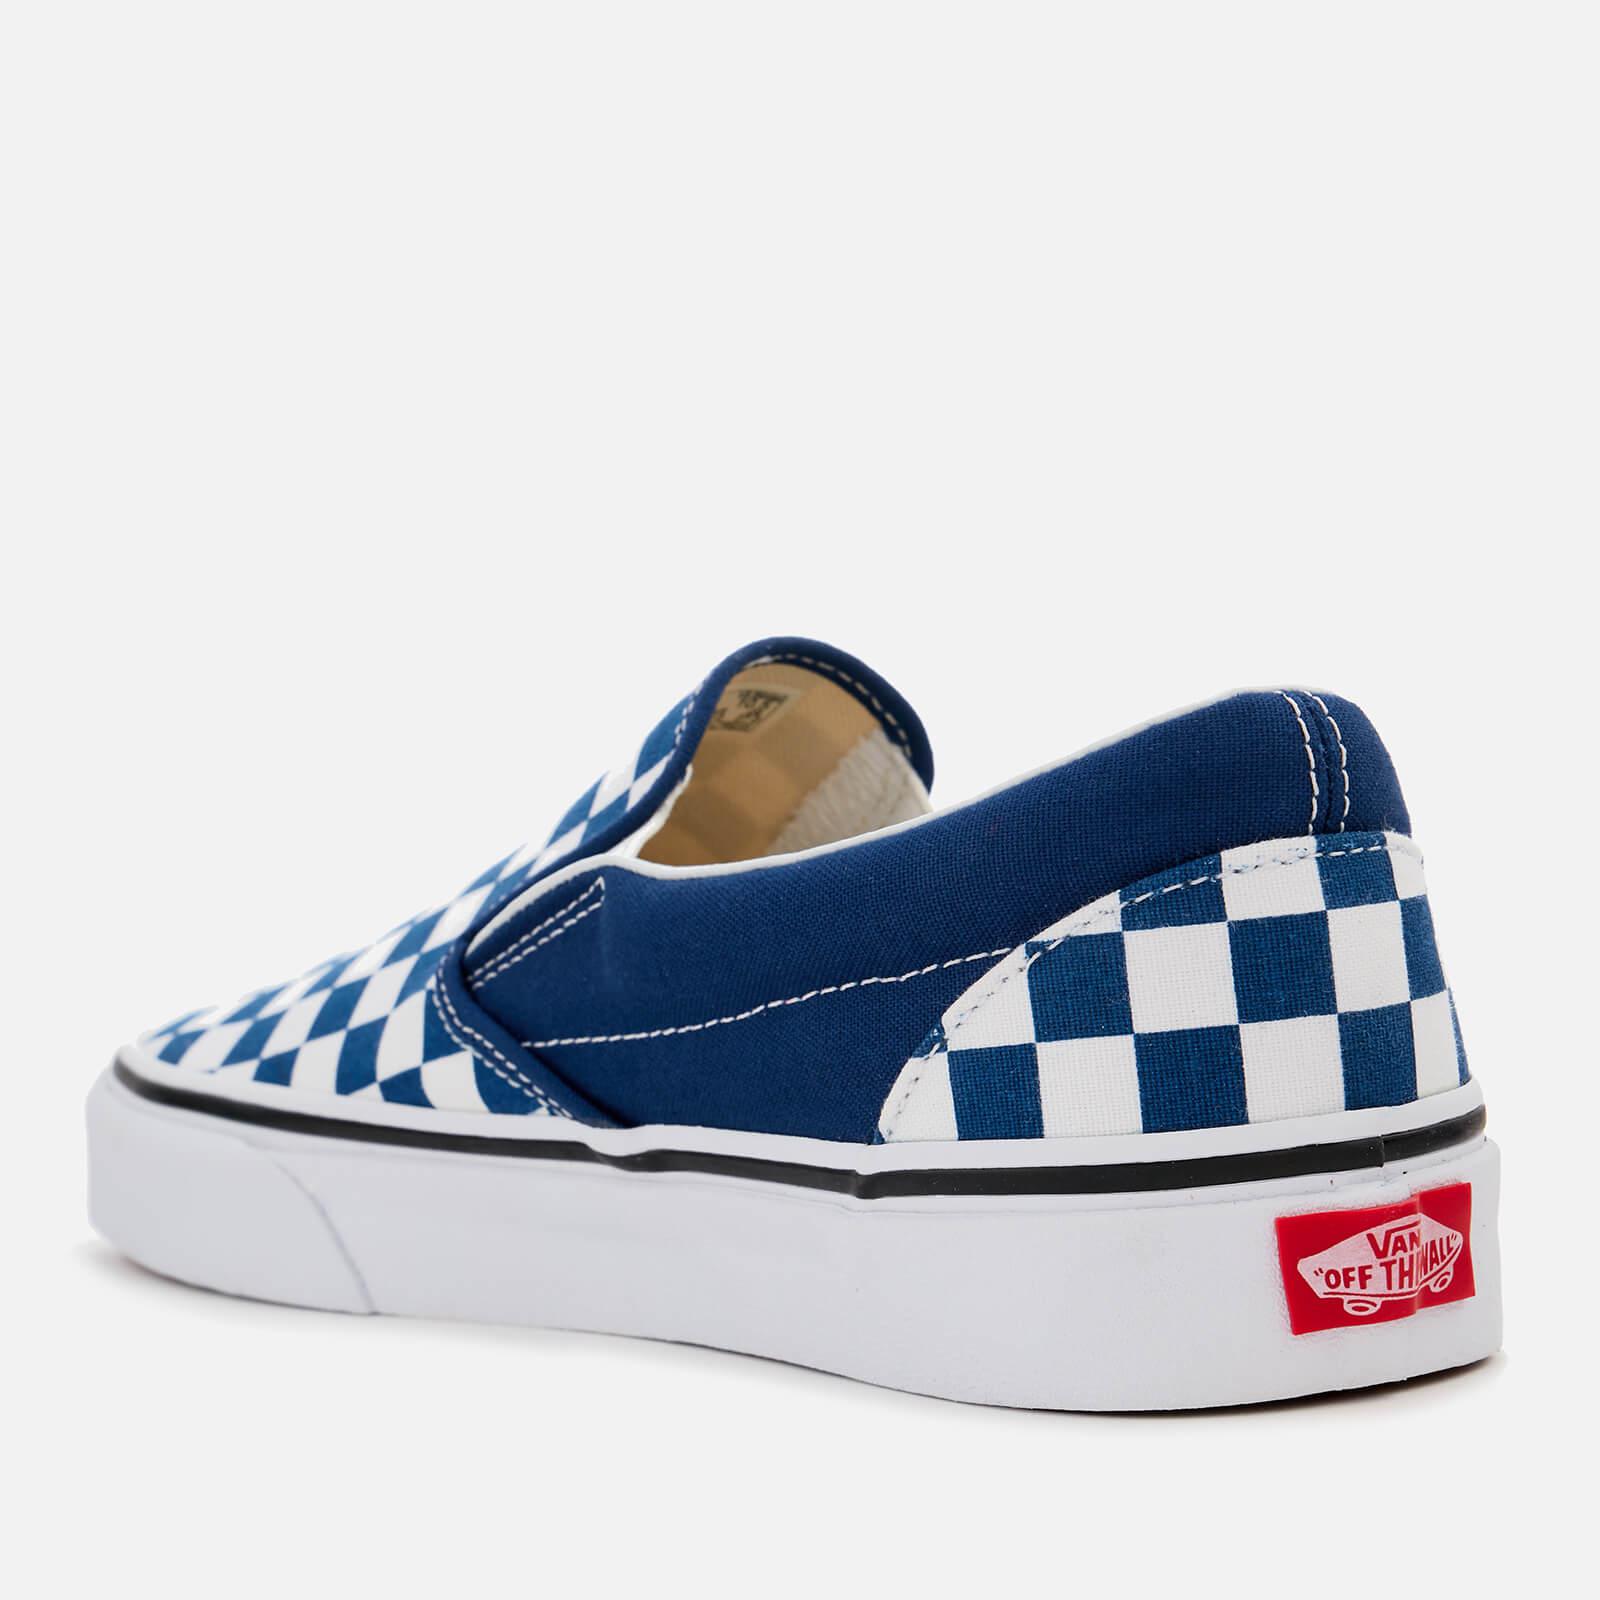 Vans Checkerboard Slip-on Trainers in Blue for Men - Lyst